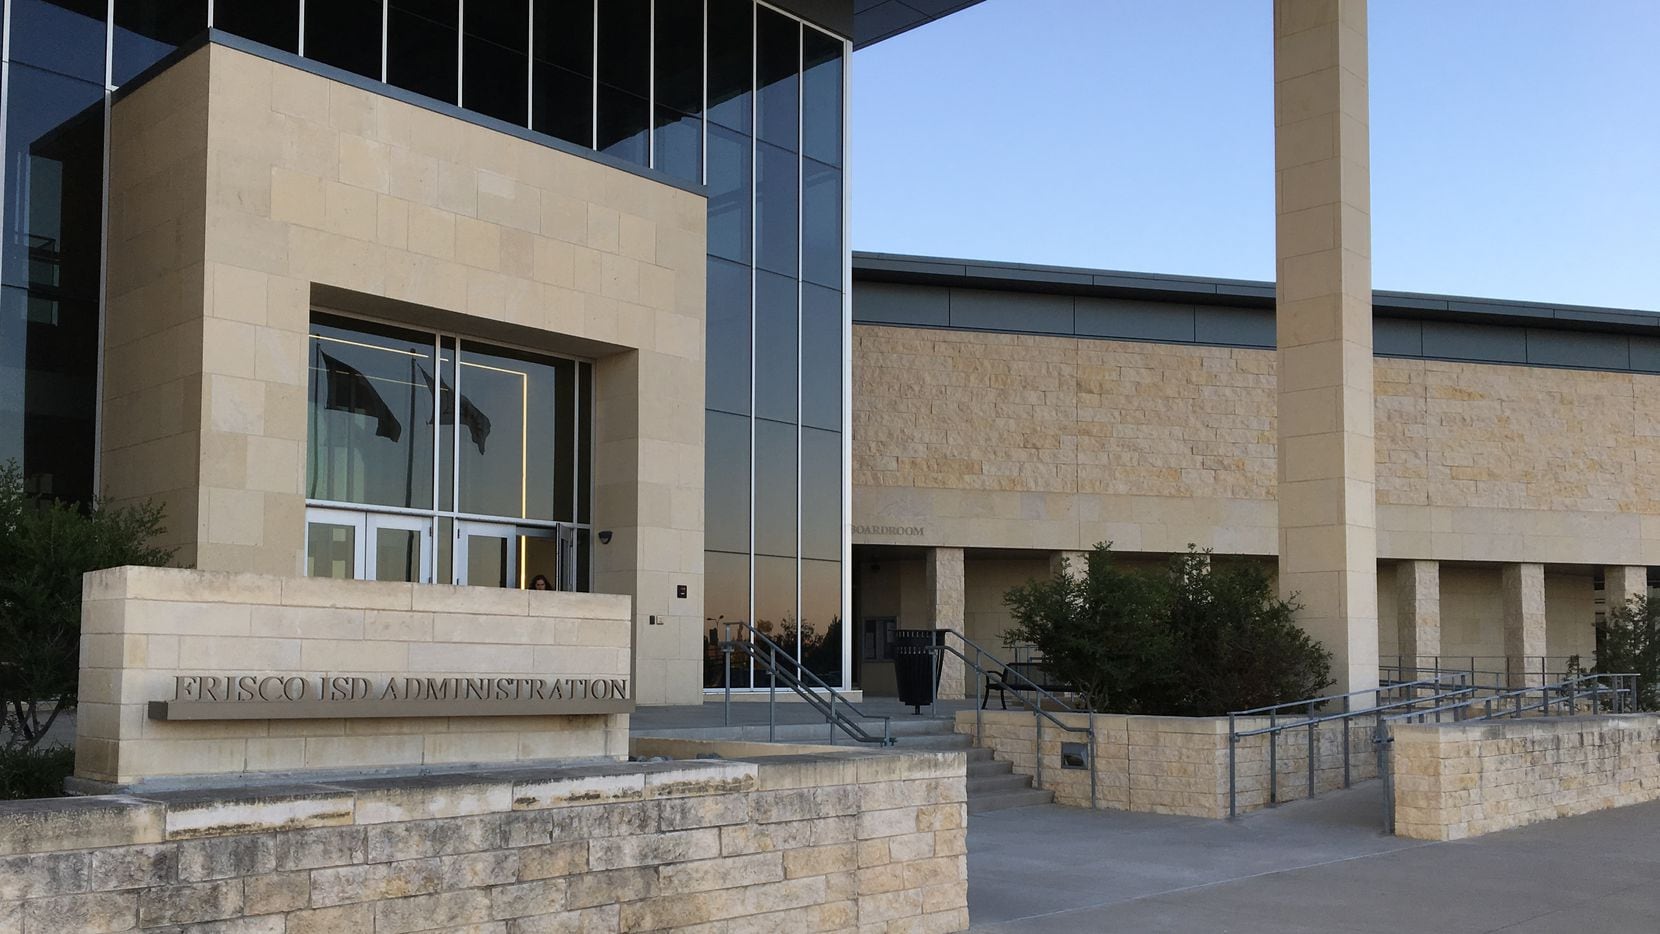 Students and staff across Frisco ISD have reported 256 new cases since the start of November.